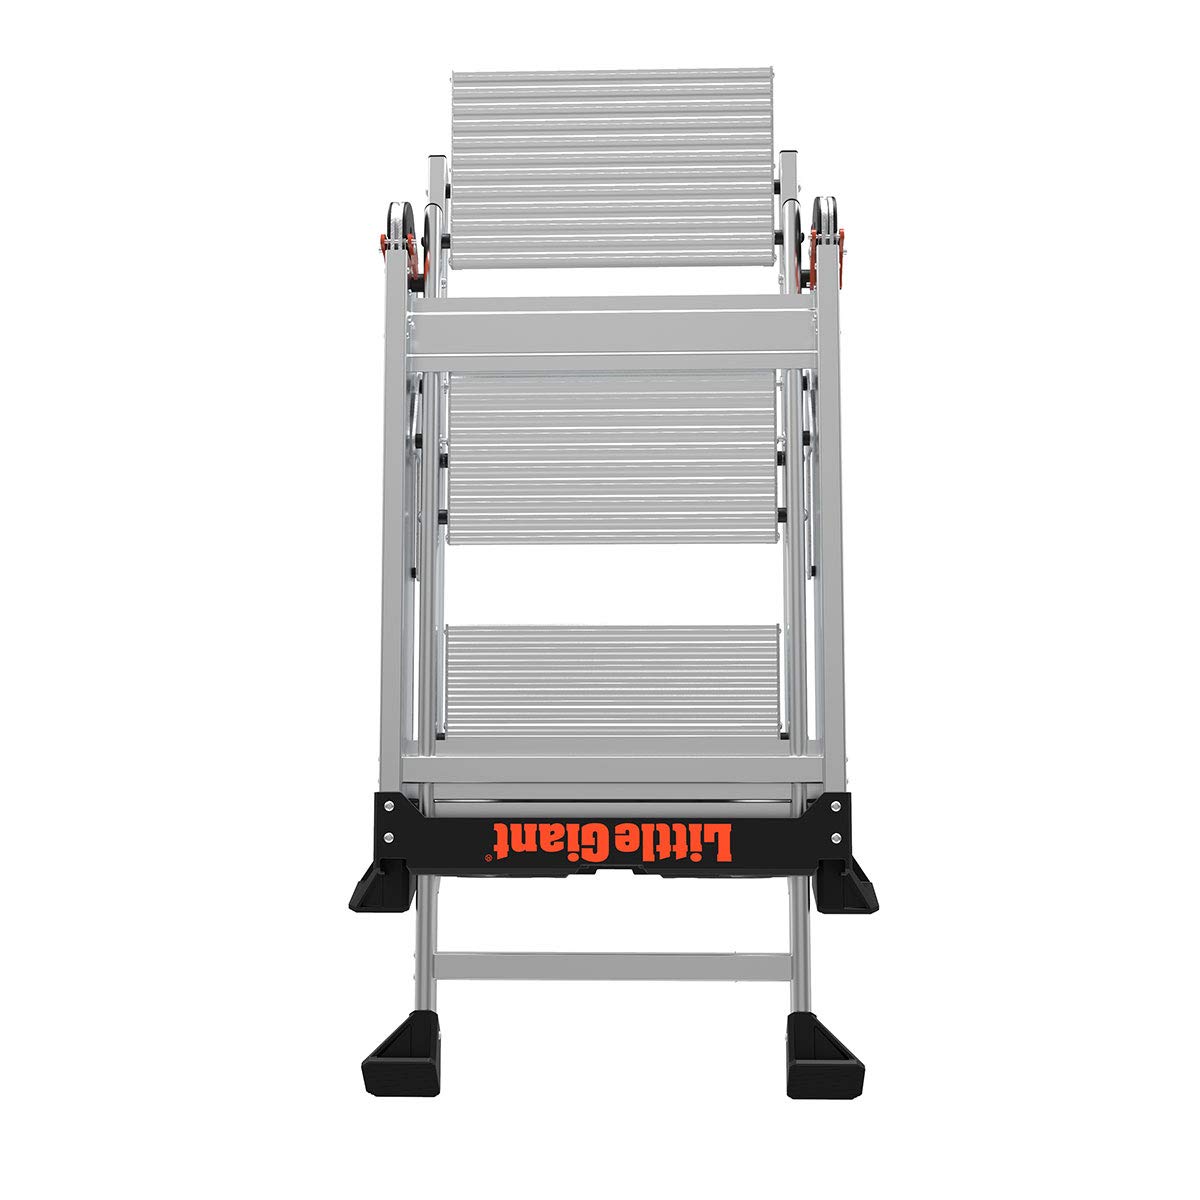 Little Giant Ladder Systems, Jumbo Step, 3-Step, 2 Foot, Step Stool, Aluminum, Type 1AA, 375 lbs Weight Rating, (11903), Gray